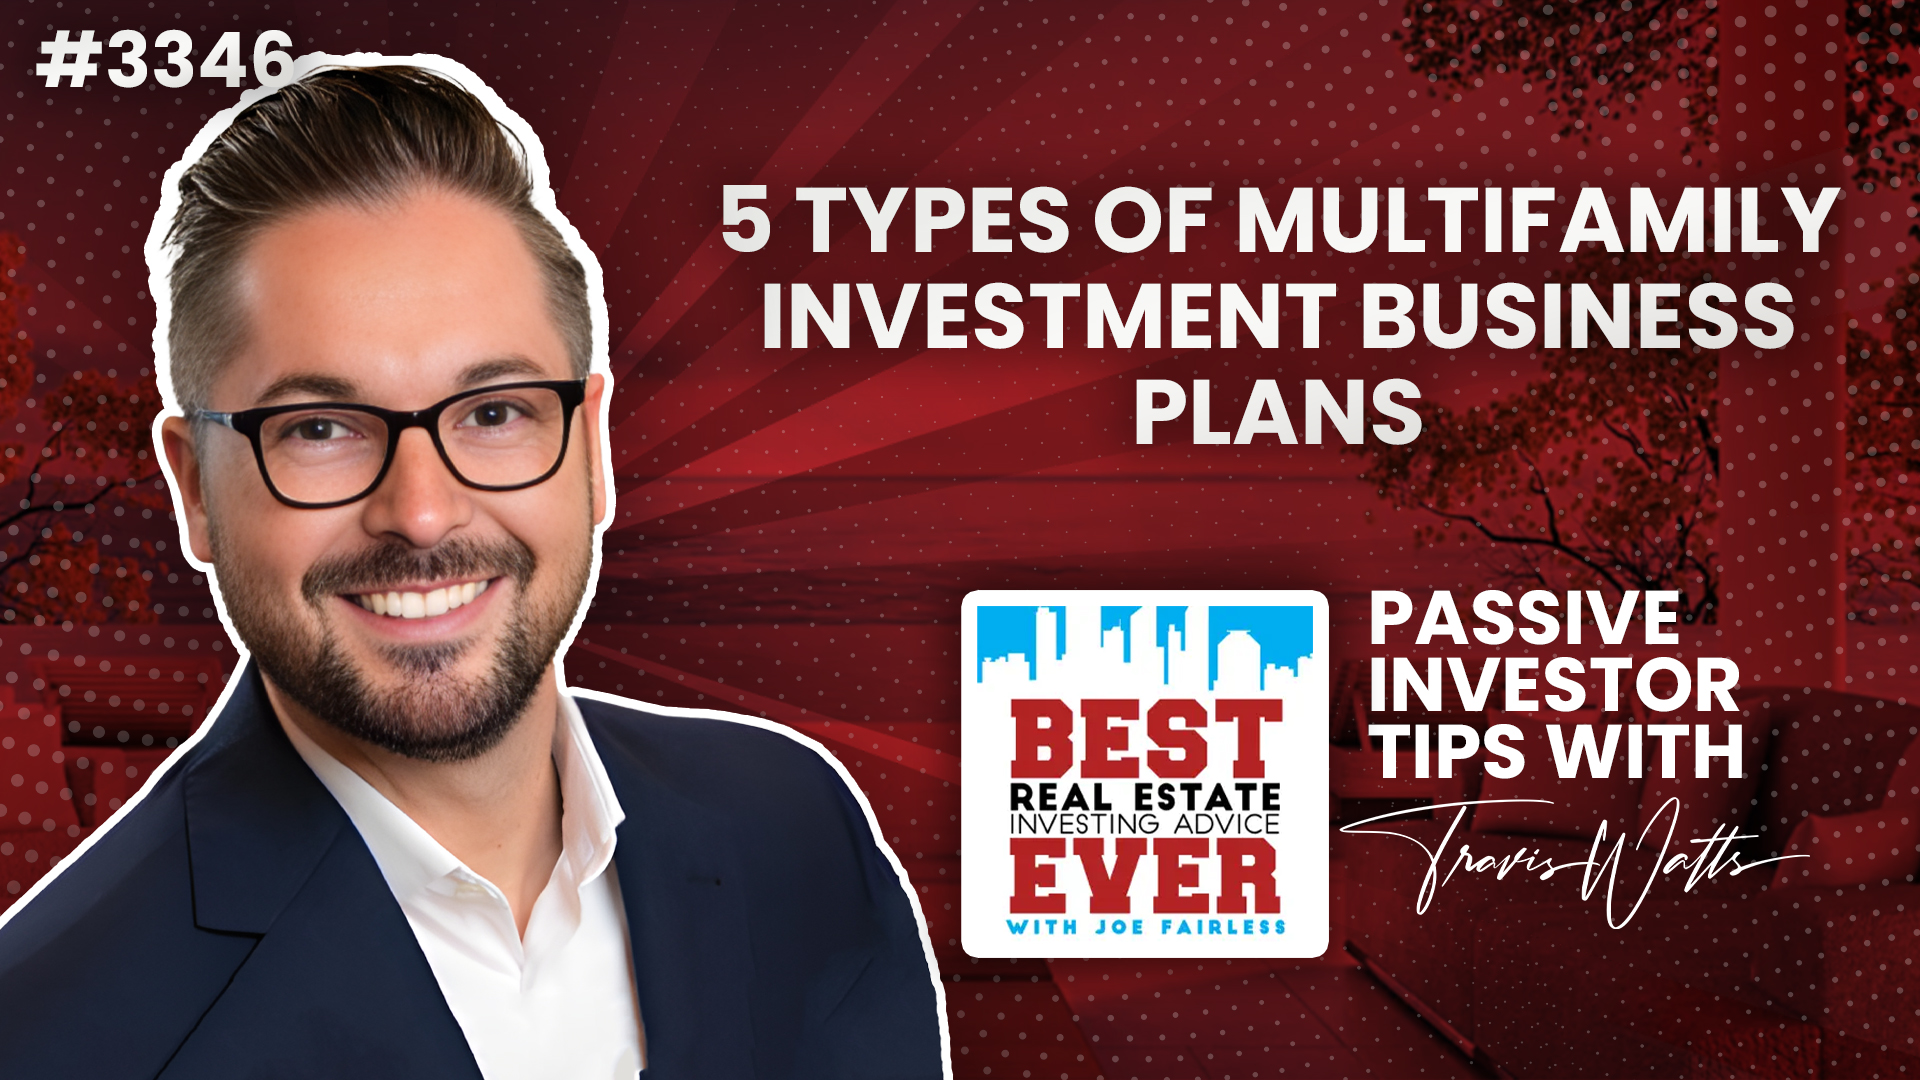 JF3346: 5 Types of Multifamily Investment Business Plans | Passive Investor Tips ft. Travis Watts